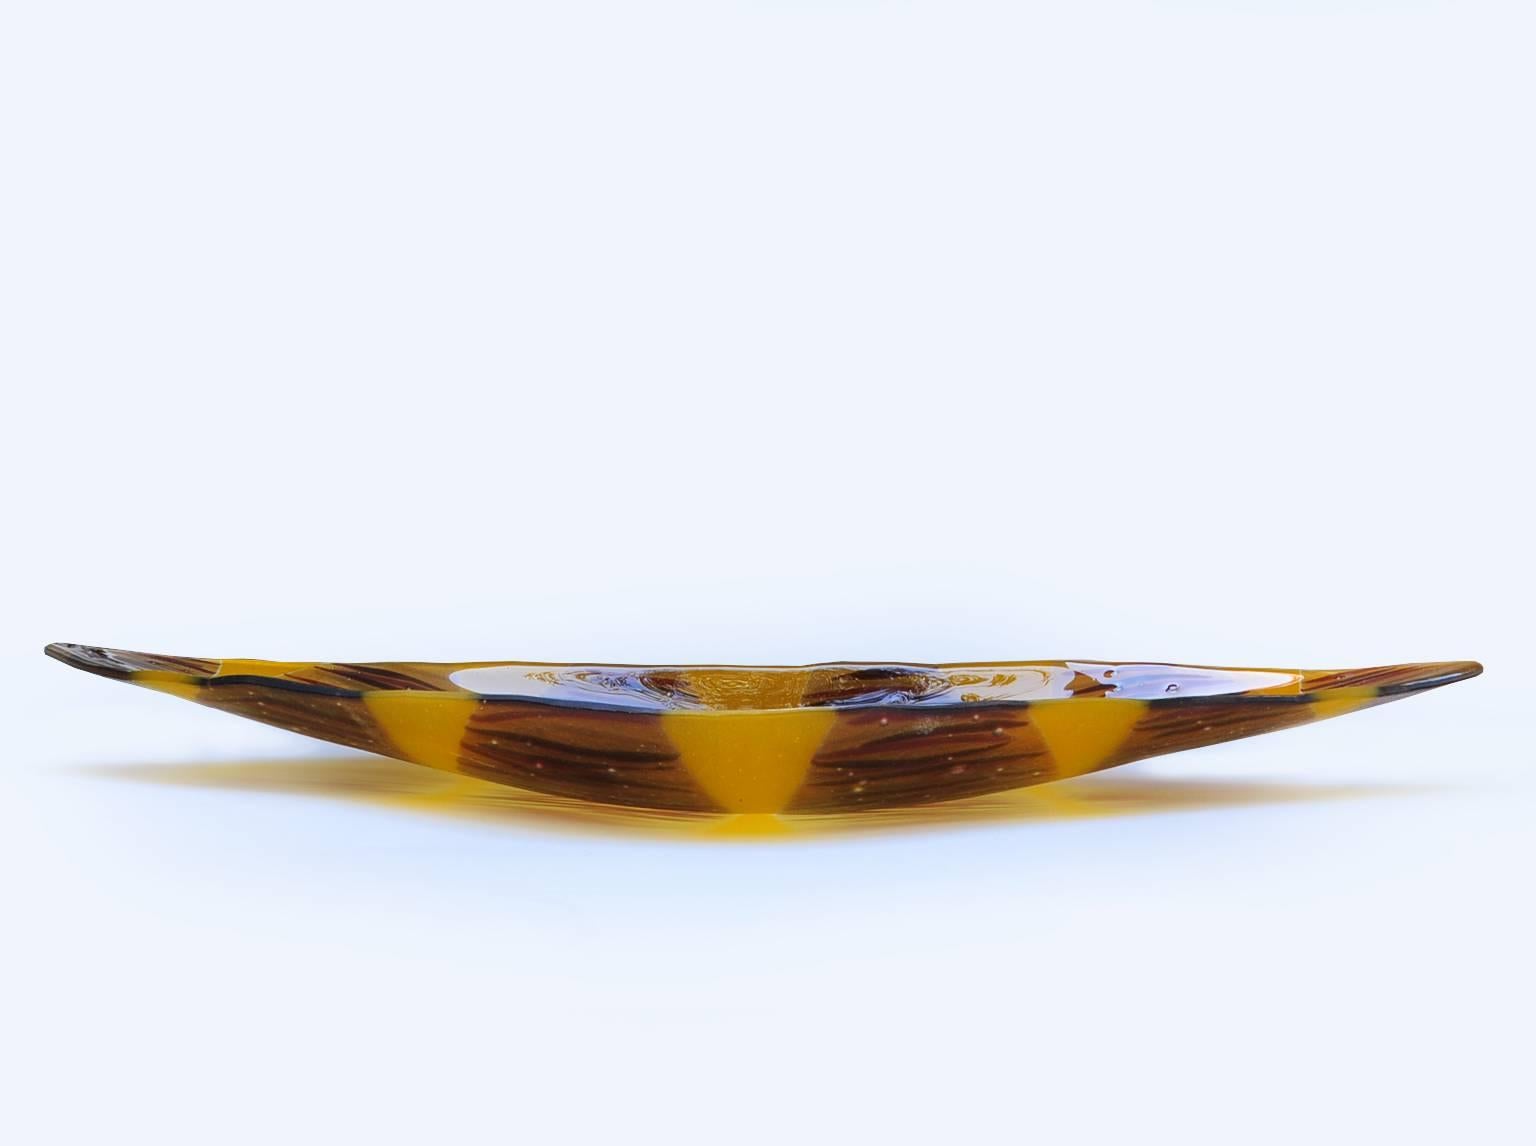 In 1990 custom-made one of a kind for a an Artecnica table exhibited at an gallery made by a French female glass make in Los Angeles,
she sold her main collection exclusively to Barneys NY.